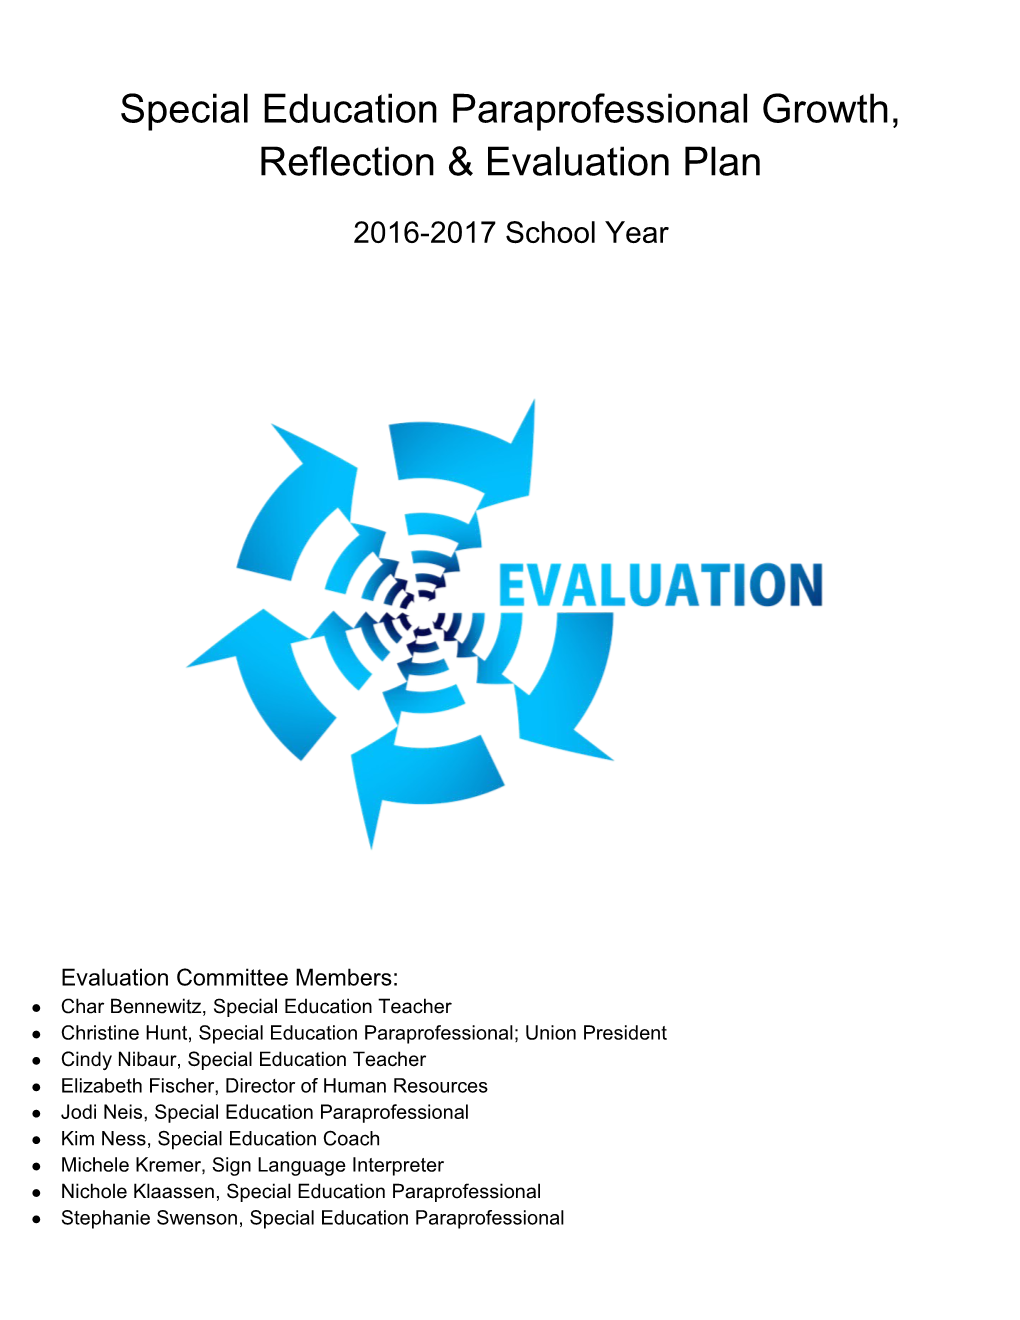 Special Education Paraprofessional Growth, Reflection & Evaluation Plan